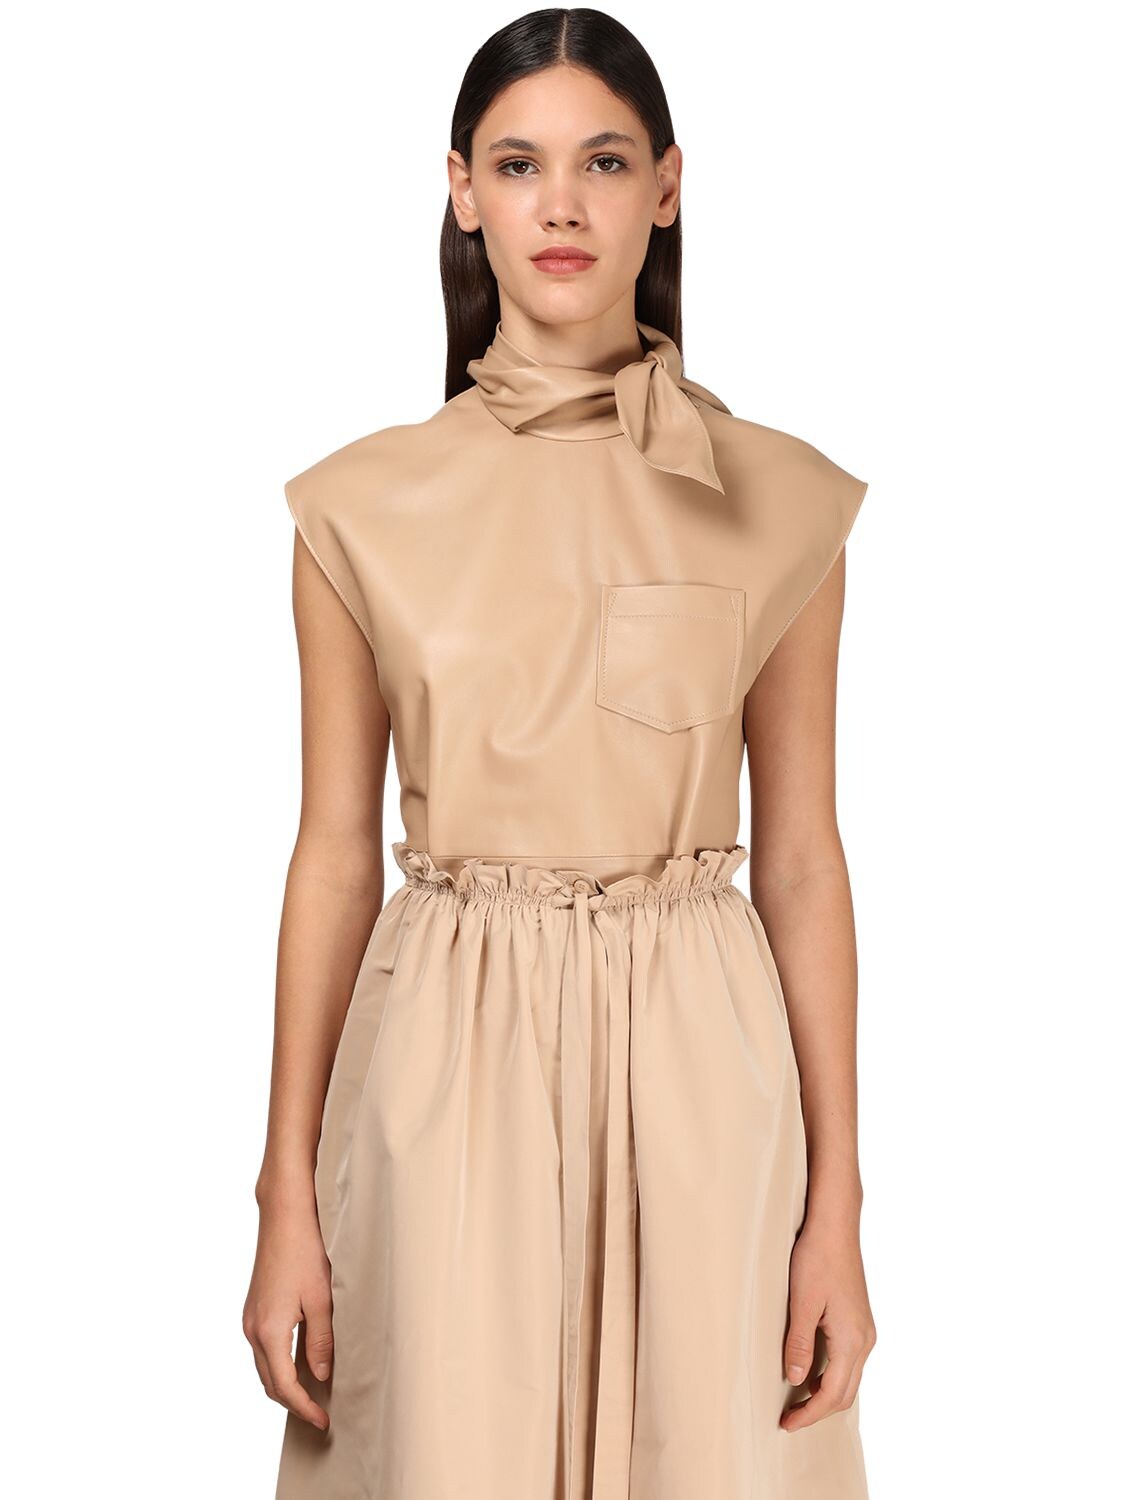 GIVENCHY LEATHER TOP W/ SELF-TIE COLLAR,71ID19002-MJG30